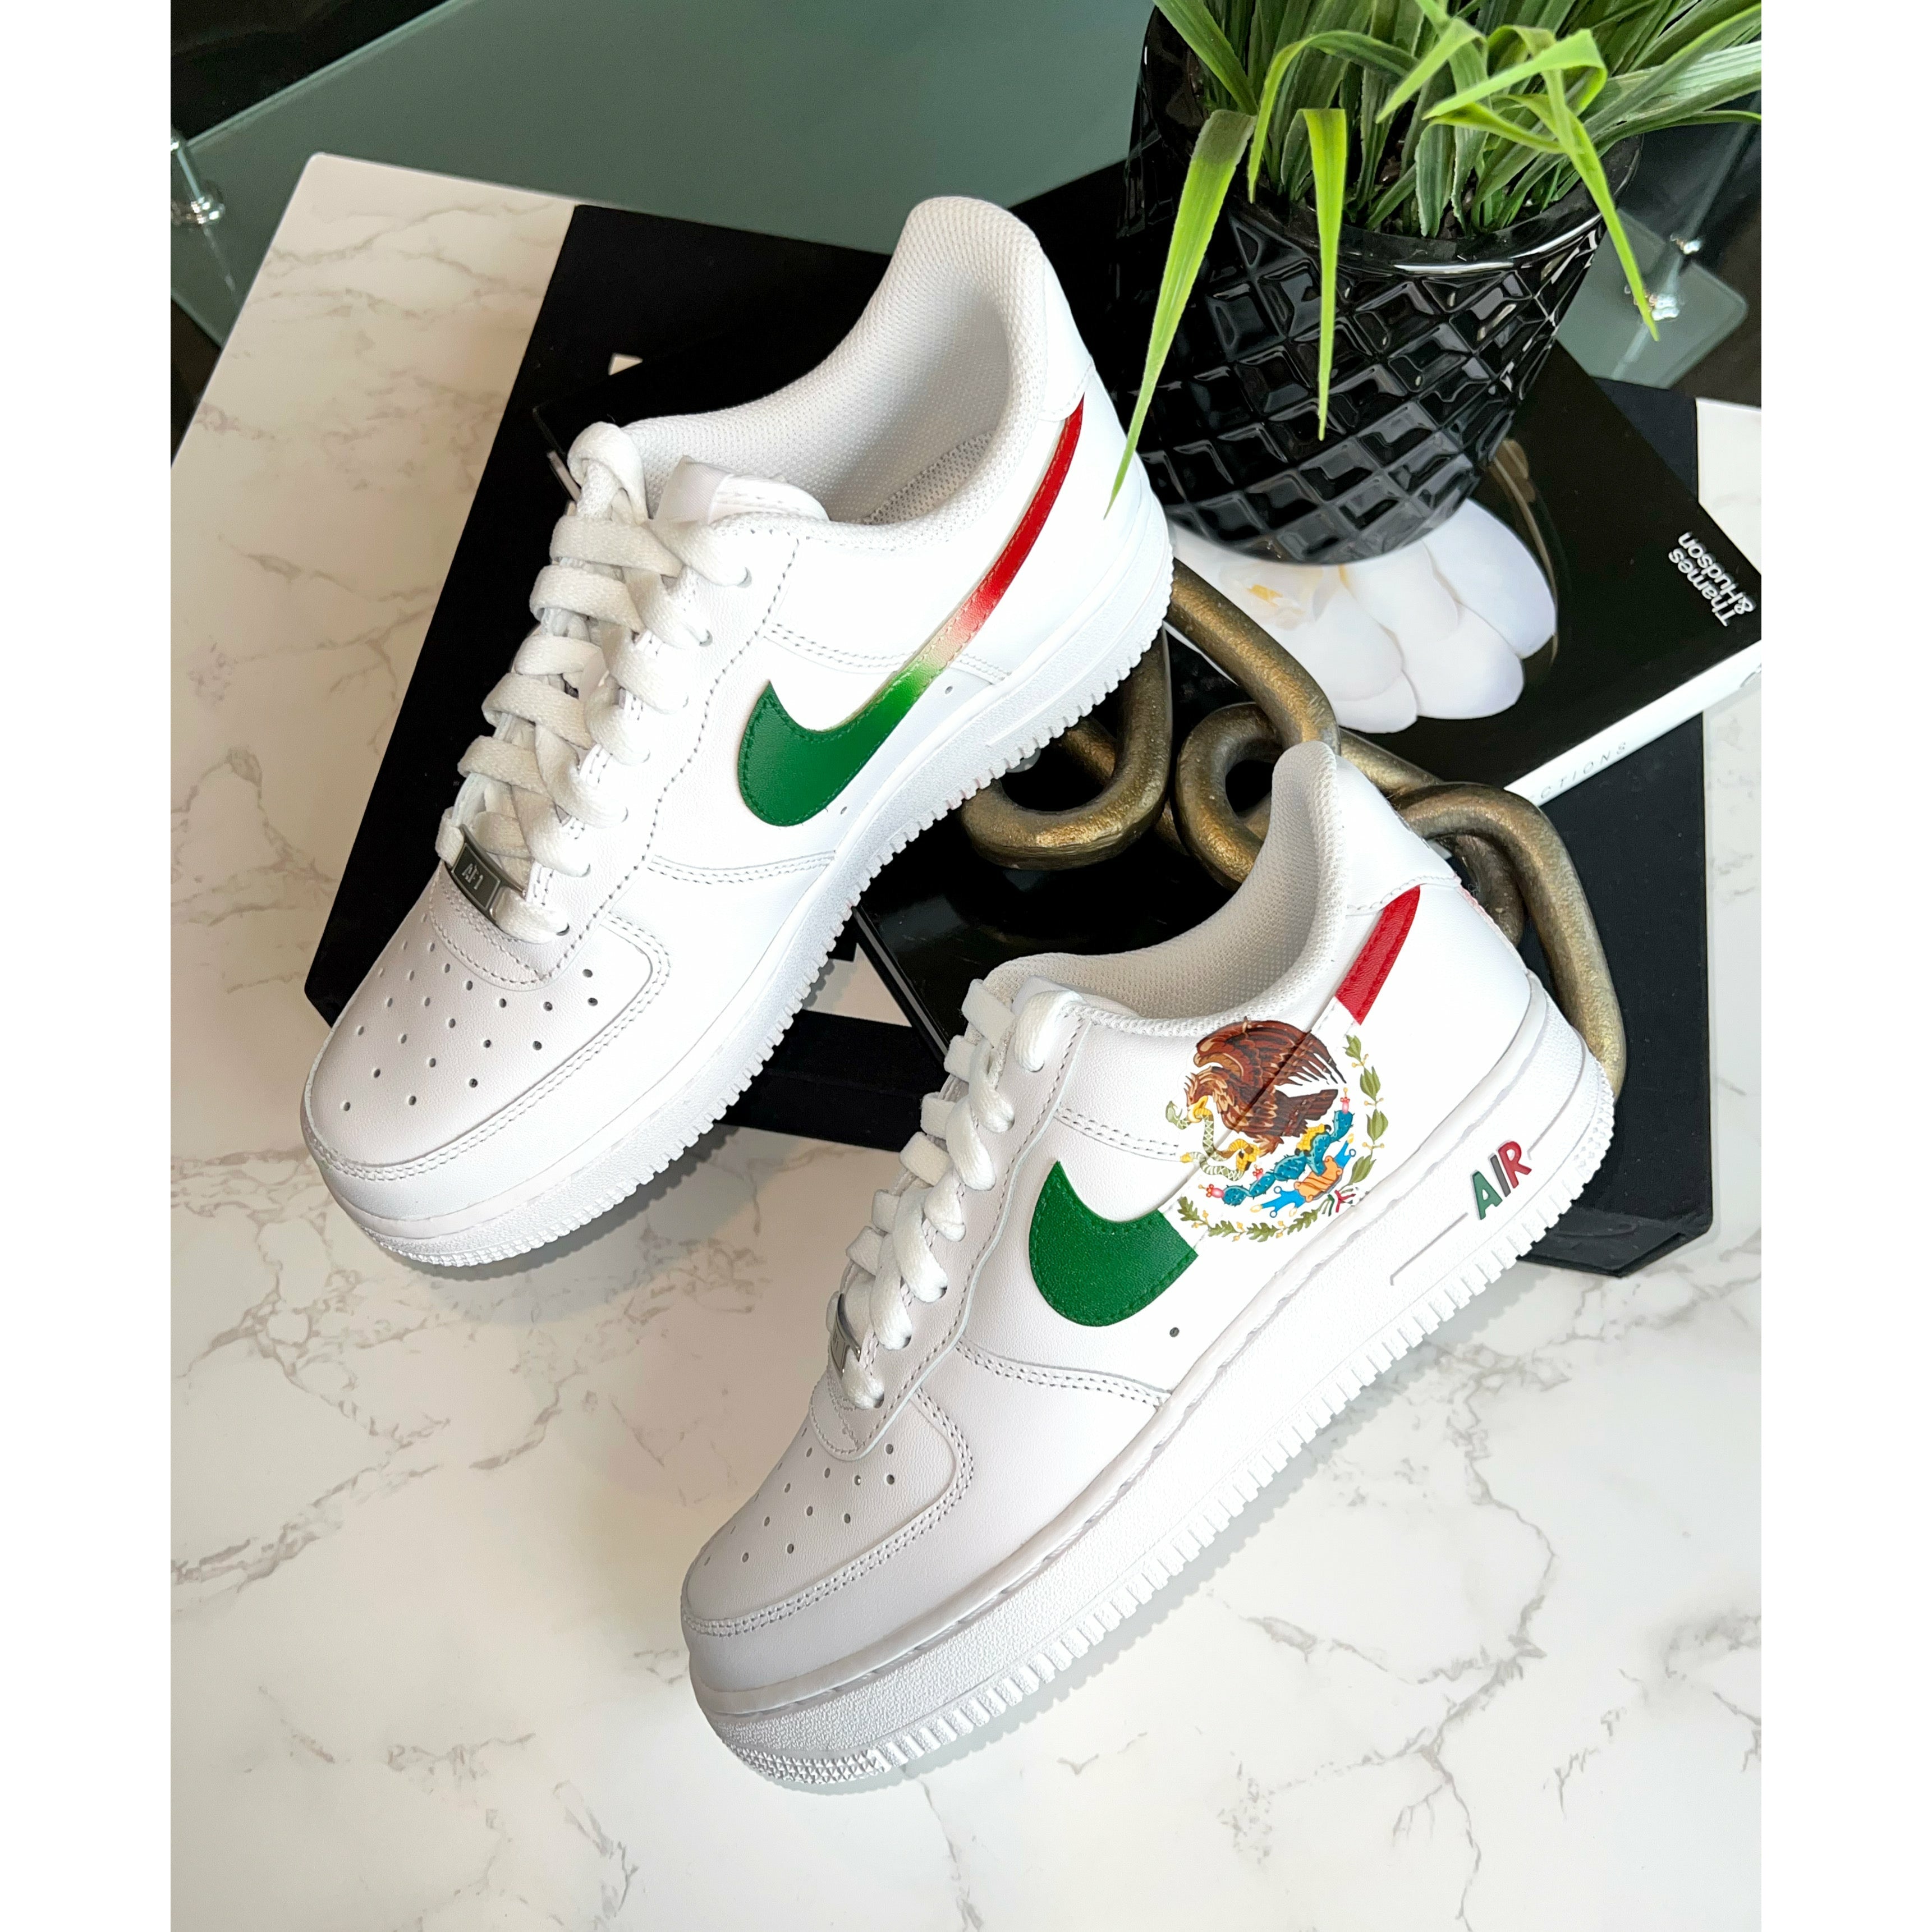 Mexico Ombré AF1s – Wavy Creationz